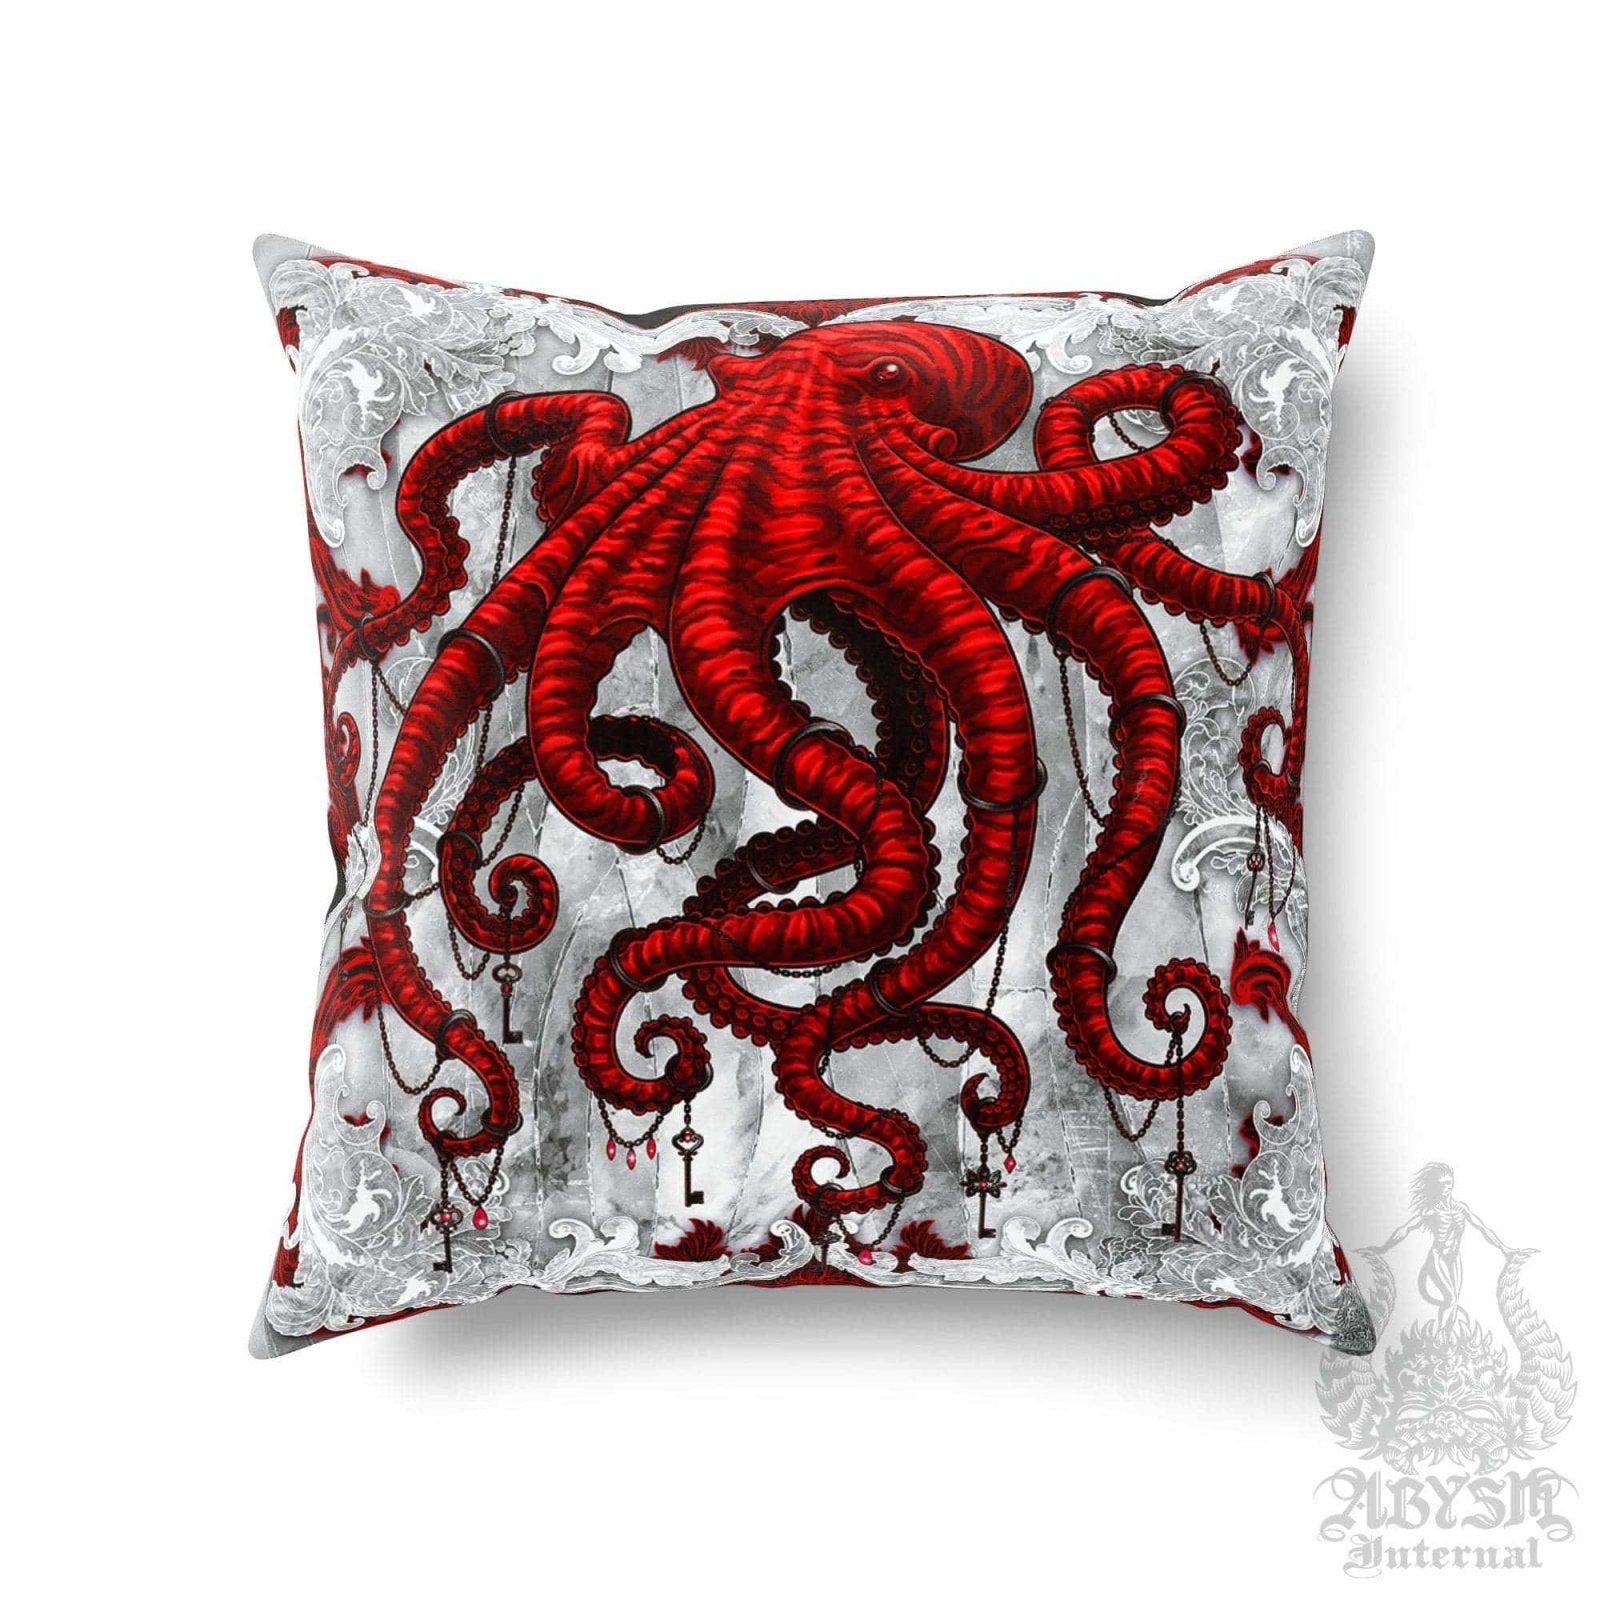 Gothic Throw Pillow, Decorative Accent Cushion, Goth Room Decor, Dark Art, Alternative Home - Bloody White and Red Octopus - Abysm Internal